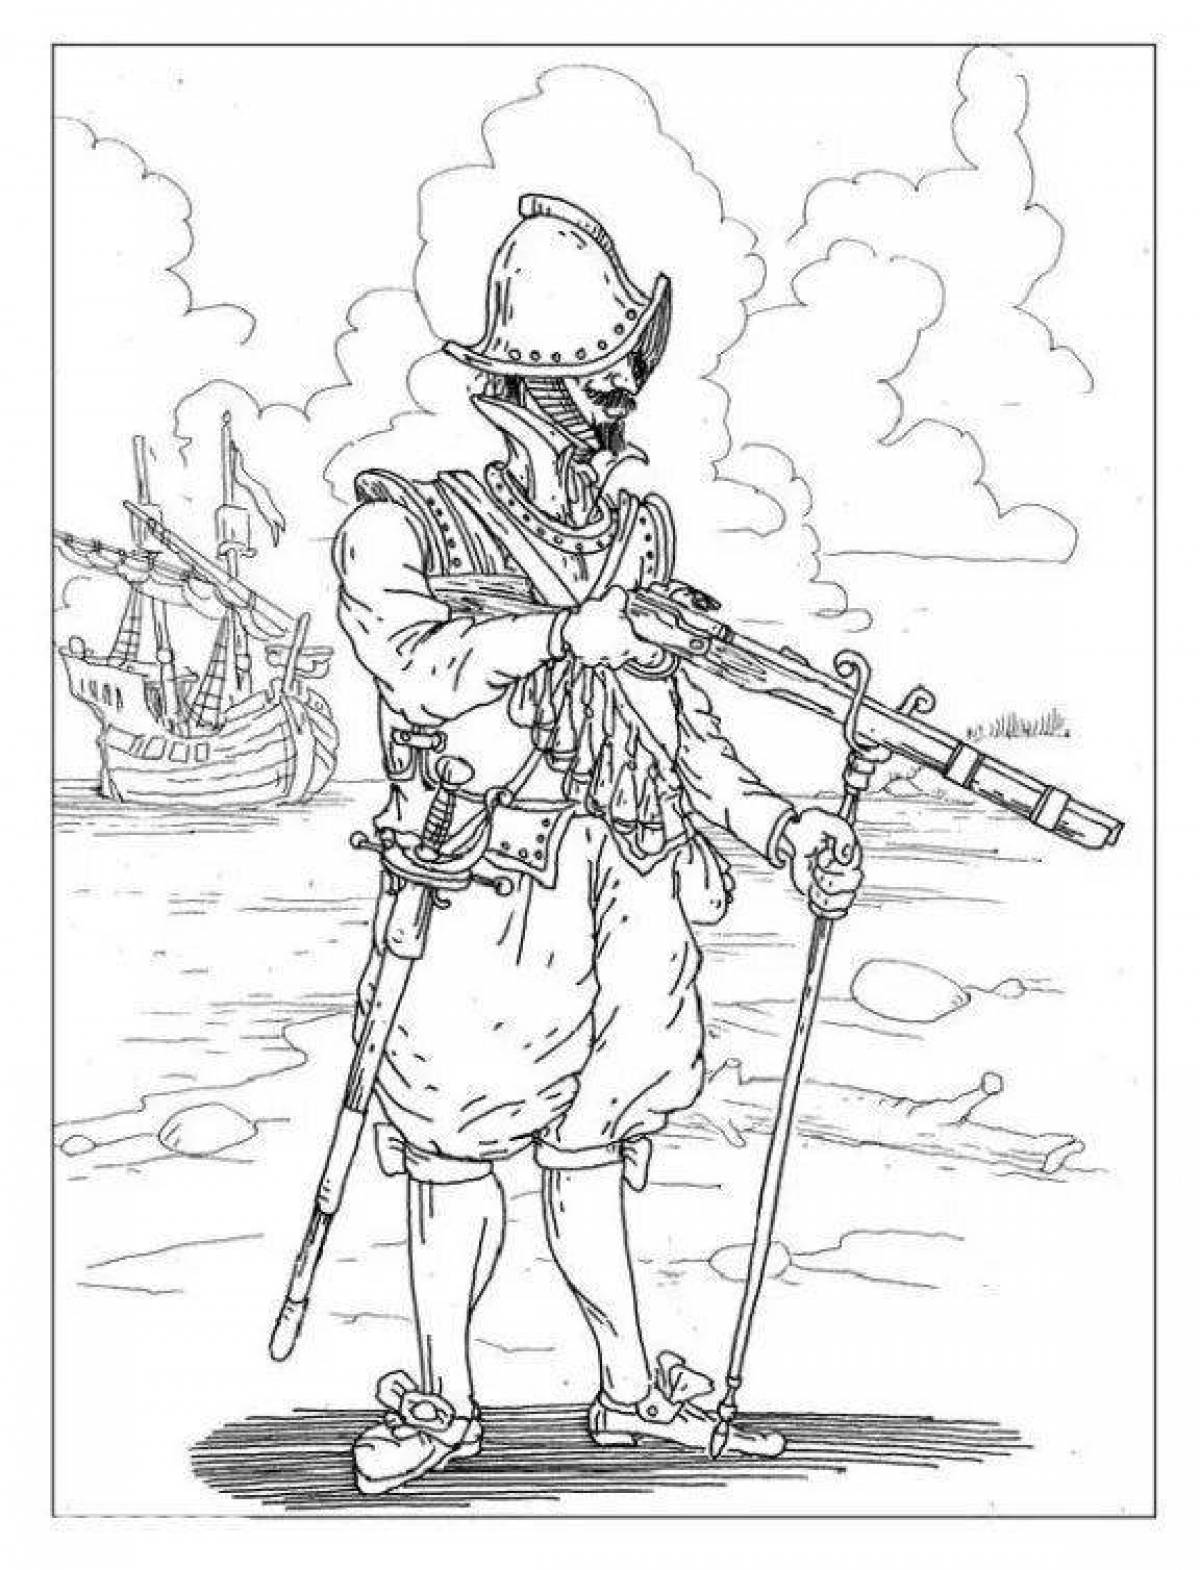 Coloring page daring Russian soldier